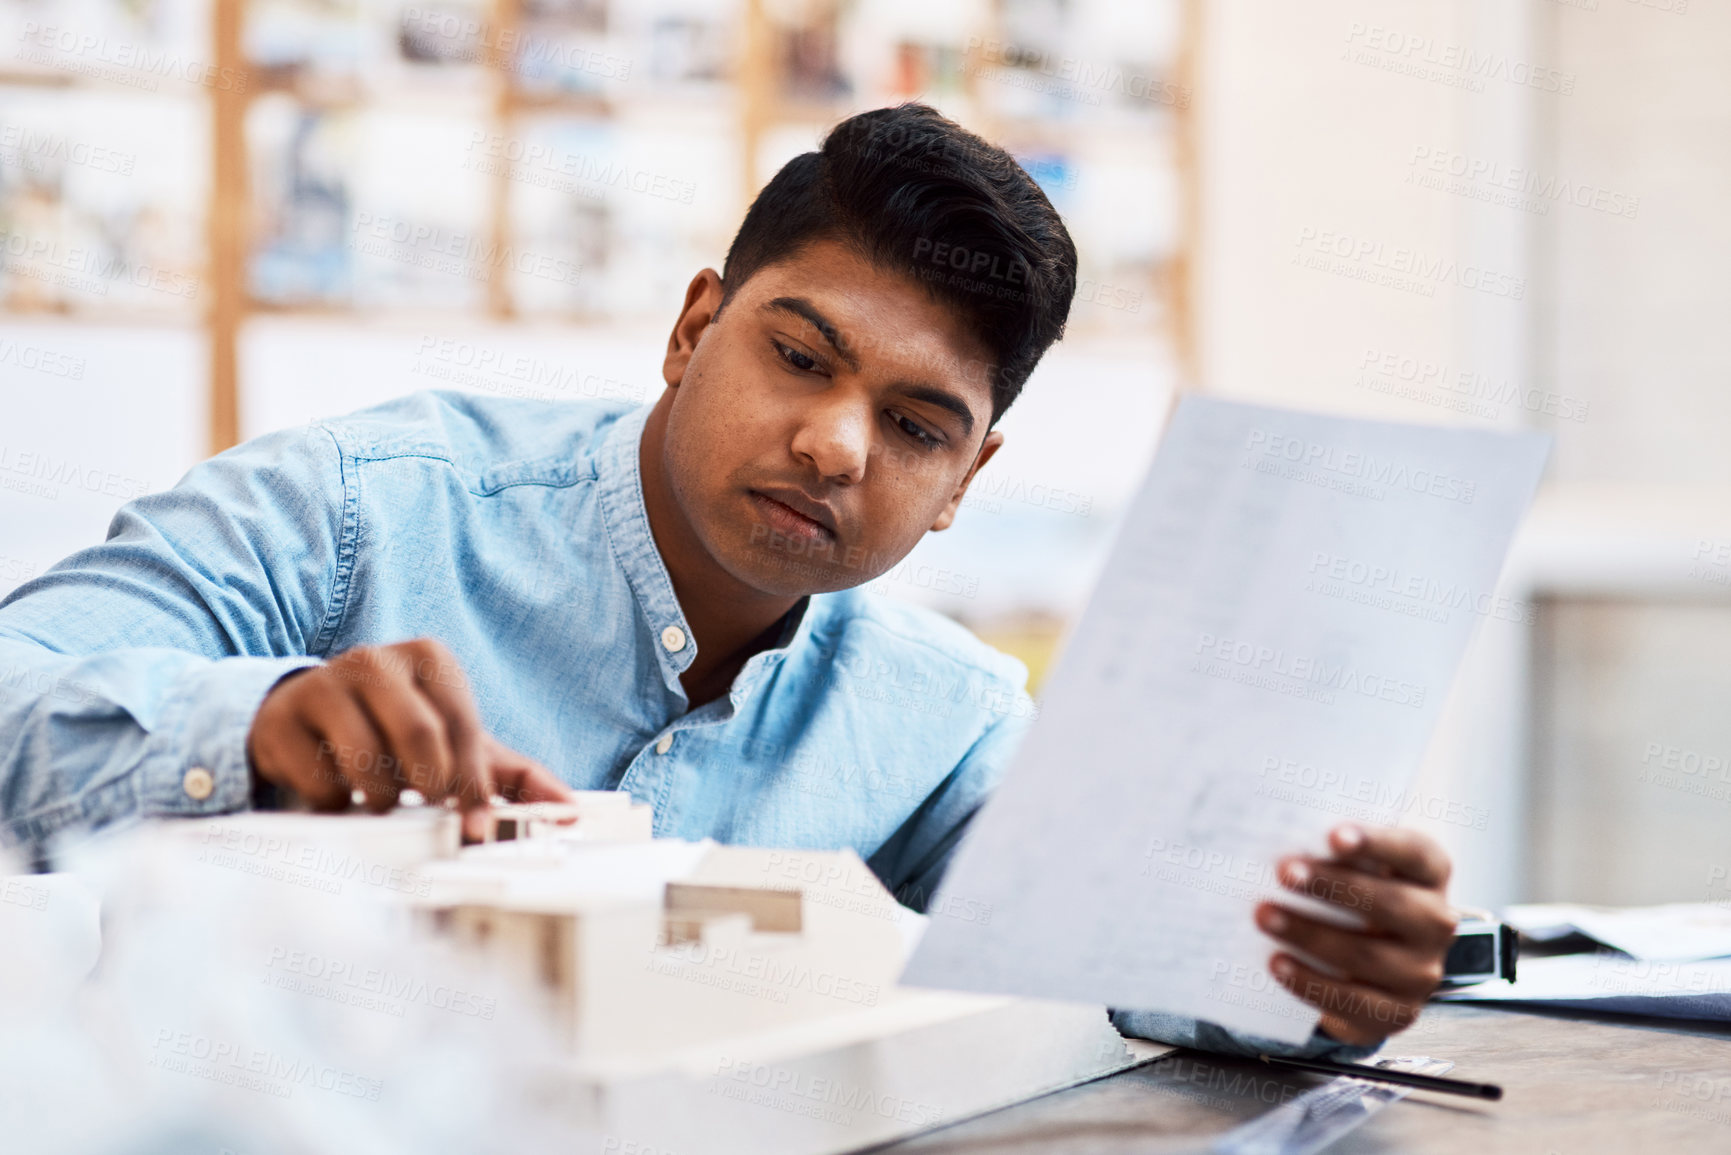 Buy stock photo Shot of a young architect designing a building model in a modern office